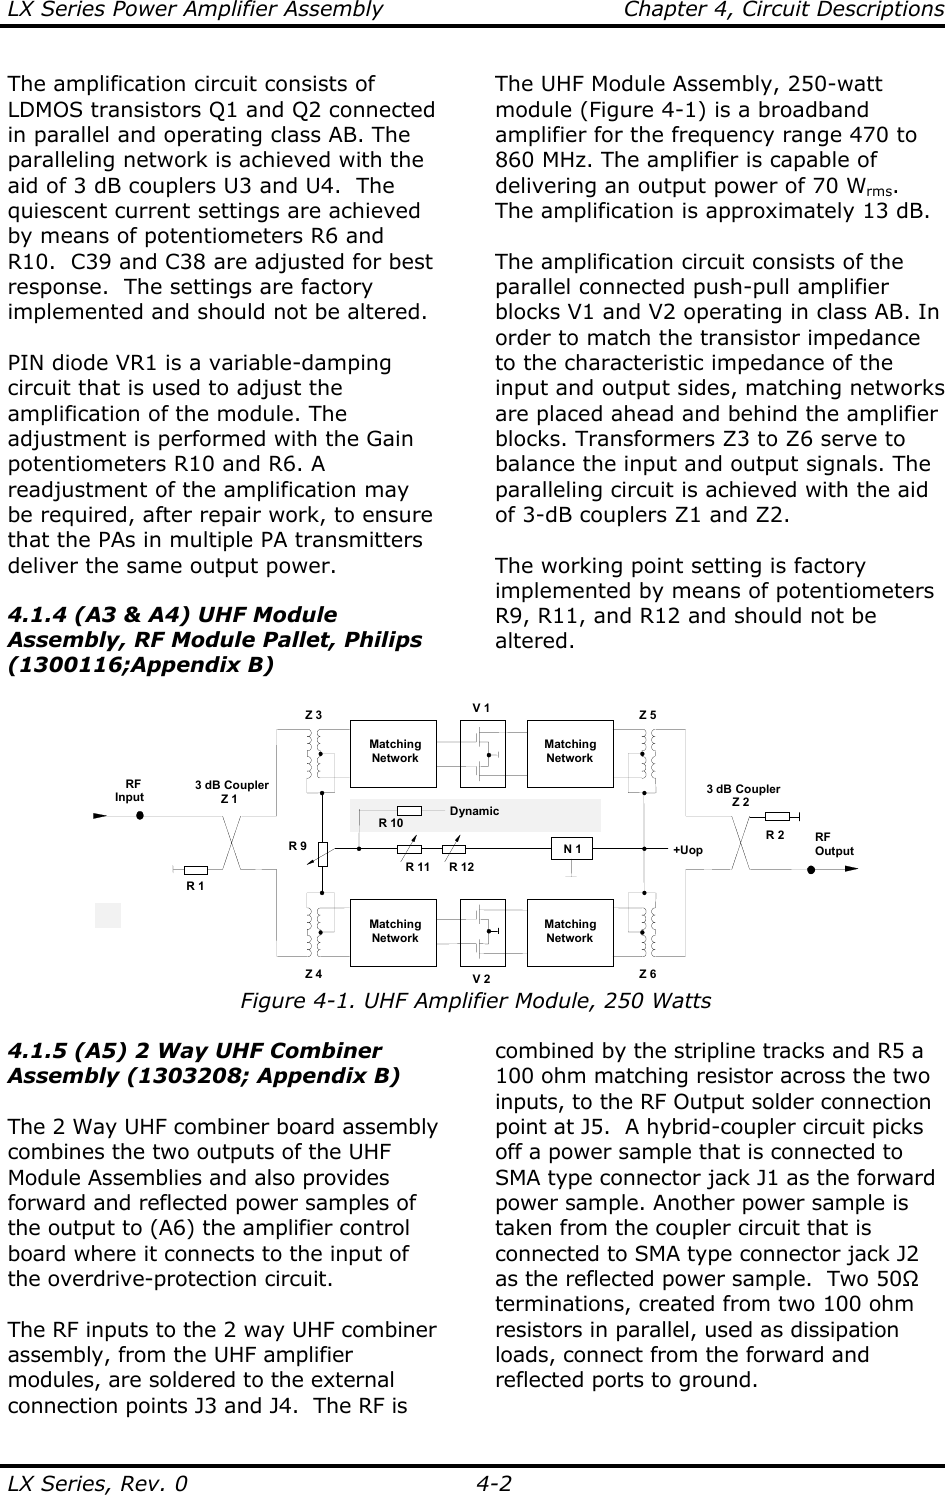 LX Series Power Amplifier Assembly    Chapter 4, Circuit Descriptions LX Series, Rev. 0    4-2 The amplification circuit consists of LDMOS transistors Q1 and Q2 connected in parallel and operating class AB. The paralleling network is achieved with the aid of 3 dB couplers U3 and U4.  The quiescent current settings are achieved by means of potentiometers R6 and R10.  C39 and C38 are adjusted for best response.  The settings are factory implemented and should not be altered.  PIN diode VR1 is a variable-damping circuit that is used to adjust the amplification of the module. The adjustment is performed with the Gain potentiometers R10 and R6. A readjustment of the amplification may be required, after repair work, to ensure that the PAs in multiple PA transmitters deliver the same output power.  4.1.4 (A3 &amp; A4) UHF Module Assembly, RF Module Pallet, Philips (1300116;Appendix B)  The UHF Module Assembly, 250-watt module (Figure 4-1) is a broadband amplifier for the frequency range 470 to 860 MHz. The amplifier is capable of delivering an output power of 70 Wrms. The amplification is approximately 13 dB.  The amplification circuit consists of the parallel connected push-pull amplifier blocks V1 and V2 operating in class AB. In order to match the transistor impedance to the characteristic impedance of the input and output sides, matching networks are placed ahead and behind the amplifier blocks. Transformers Z3 to Z6 serve to balance the input and output signals. The paralleling circuit is achieved with the aid of 3-dB couplers Z1 and Z2.  The working point setting is factory implemented by means of potentiometers R9, R11, and R12 and should not be altered.  V 13 dB CouplerZ 2RFOutputRFInput3 dB CouplerZ 1R 2R 1MatchingNetworkMatchingNetworkV 2MatchingNetworkMatchingNetworkZ 3 Z 5Z 4 Z 6+UopN 1R 11 R 12R 9R 10Dynamic Figure 4-1. UHF Amplifier Module, 250 Watts 4.1.5 (A5) 2 Way UHF Combiner Assembly (1303208; Appendix B)  The 2 Way UHF combiner board assembly combines the two outputs of the UHF Module Assemblies and also provides forward and reflected power samples of the output to (A6) the amplifier control board where it connects to the input of the overdrive-protection circuit.  The RF inputs to the 2 way UHF combiner assembly, from the UHF amplifier modules, are soldered to the external connection points J3 and J4.  The RF is combined by the stripline tracks and R5 a 100 ohm matching resistor across the two inputs, to the RF Output solder connection point at J5.  A hybrid-coupler circuit picks off a power sample that is connected to SMA type connector jack J1 as the forward power sample. Another power sample is taken from the coupler circuit that is connected to SMA type connector jack J2 as the reflected power sample.  Two 50Ω terminations, created from two 100 ohm resistors in parallel, used as dissipation loads, connect from the forward and reflected ports to ground.  